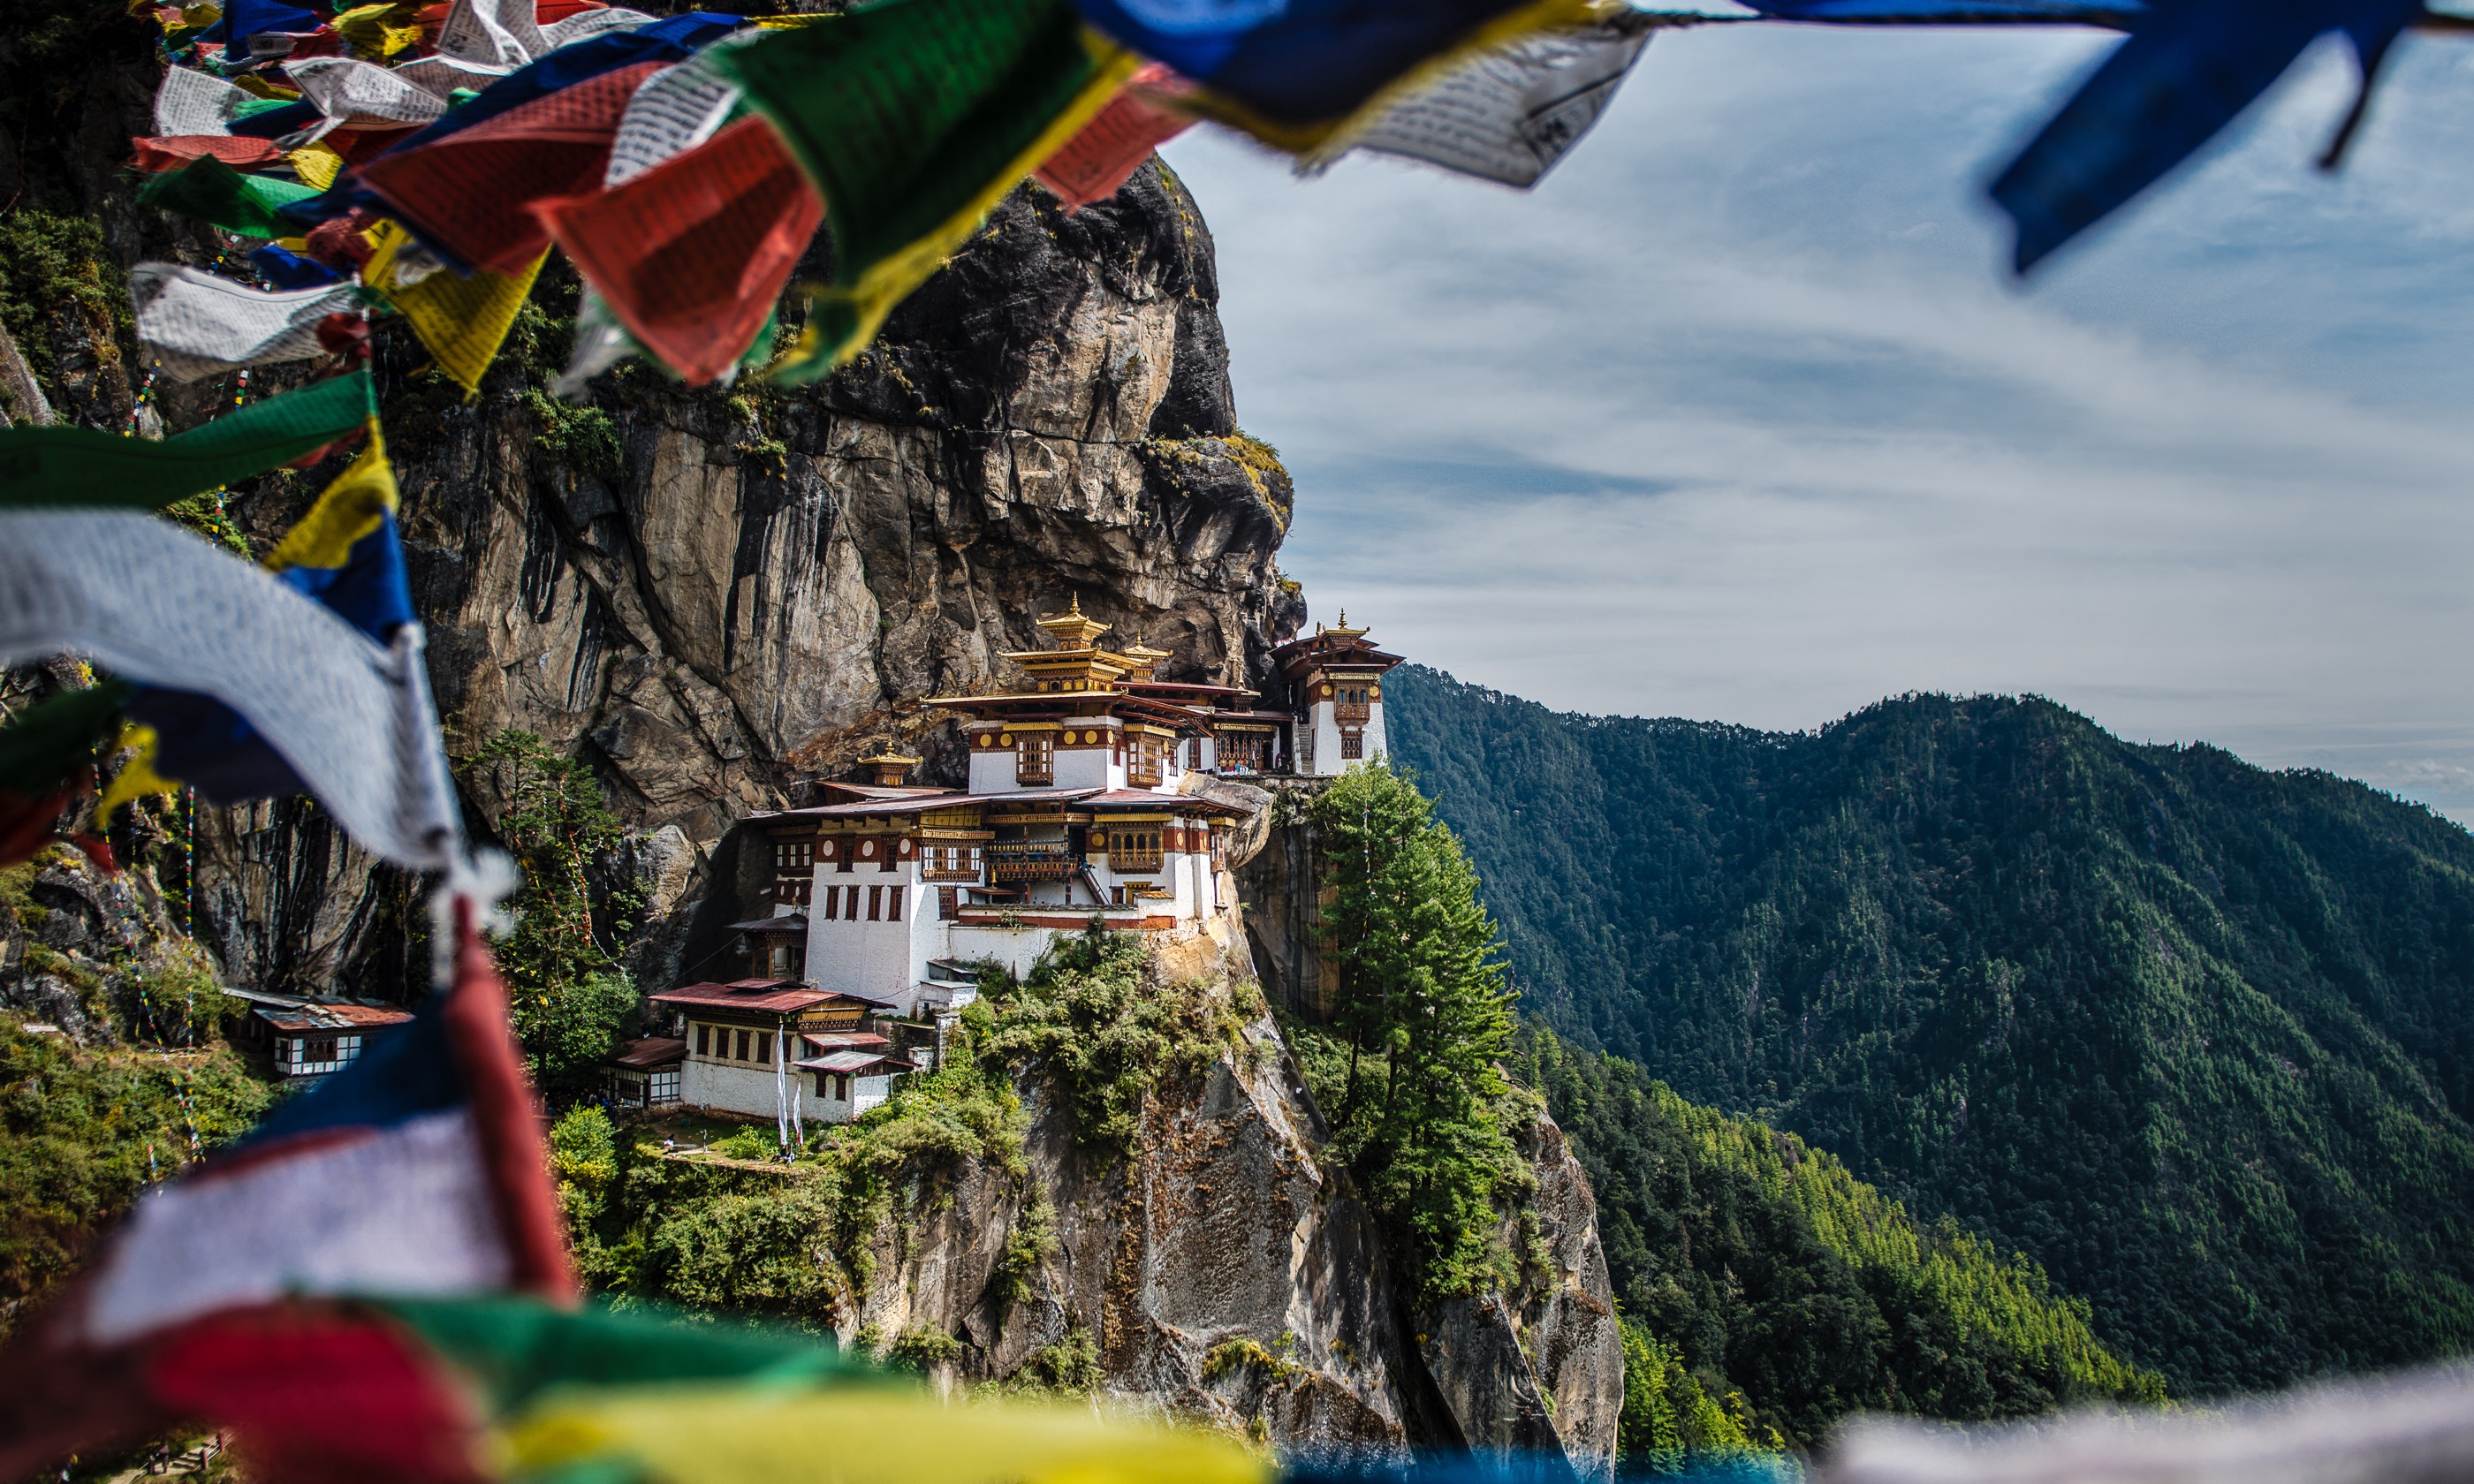 Taktsang Monastery on the side of the upper Paro valley, Bhutan (Shutterstock.com. See main credit below)